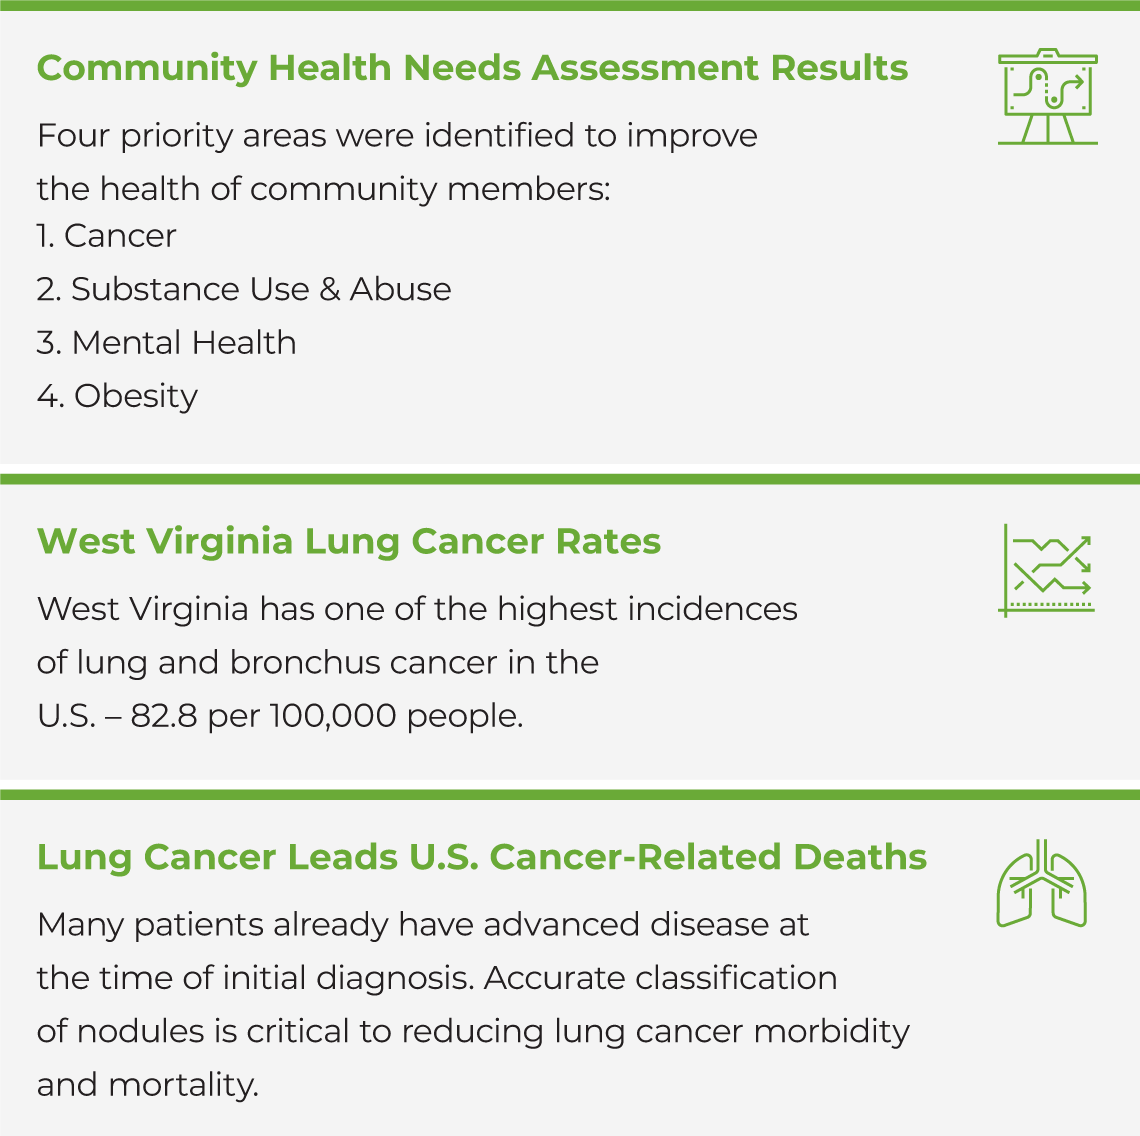 Table highlighting three factors that influenced Mon Health System’s decision to focus on lung cancer. The three factors were: (1) Lung cancer was identified as the top priority area in a community health needs assessment (2) West Virginia has one of the highest rates of lung and bronchus cancer (3) lung cancer leads U.S. cancer-related deaths.